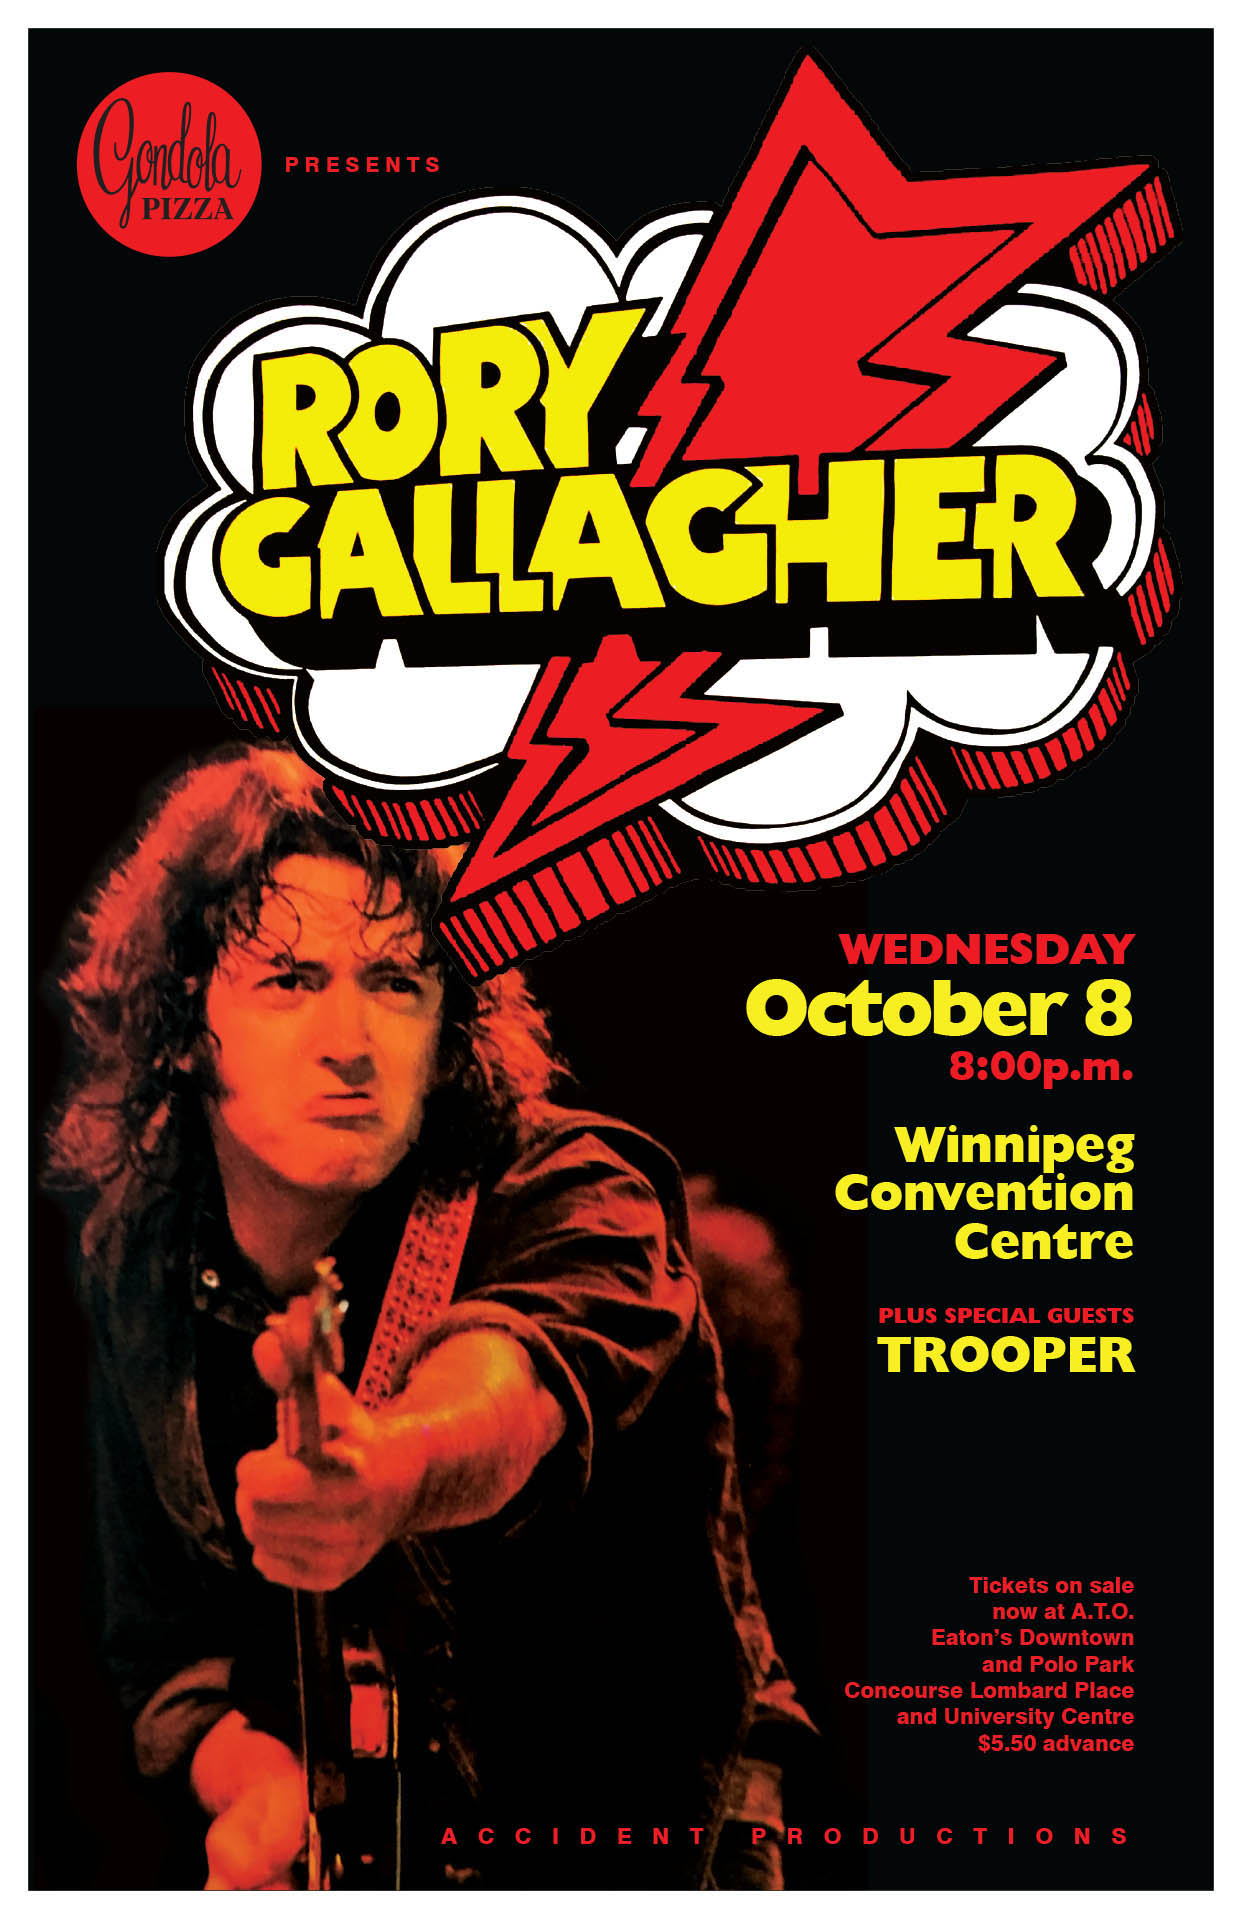 Rory Gallagher – 1975